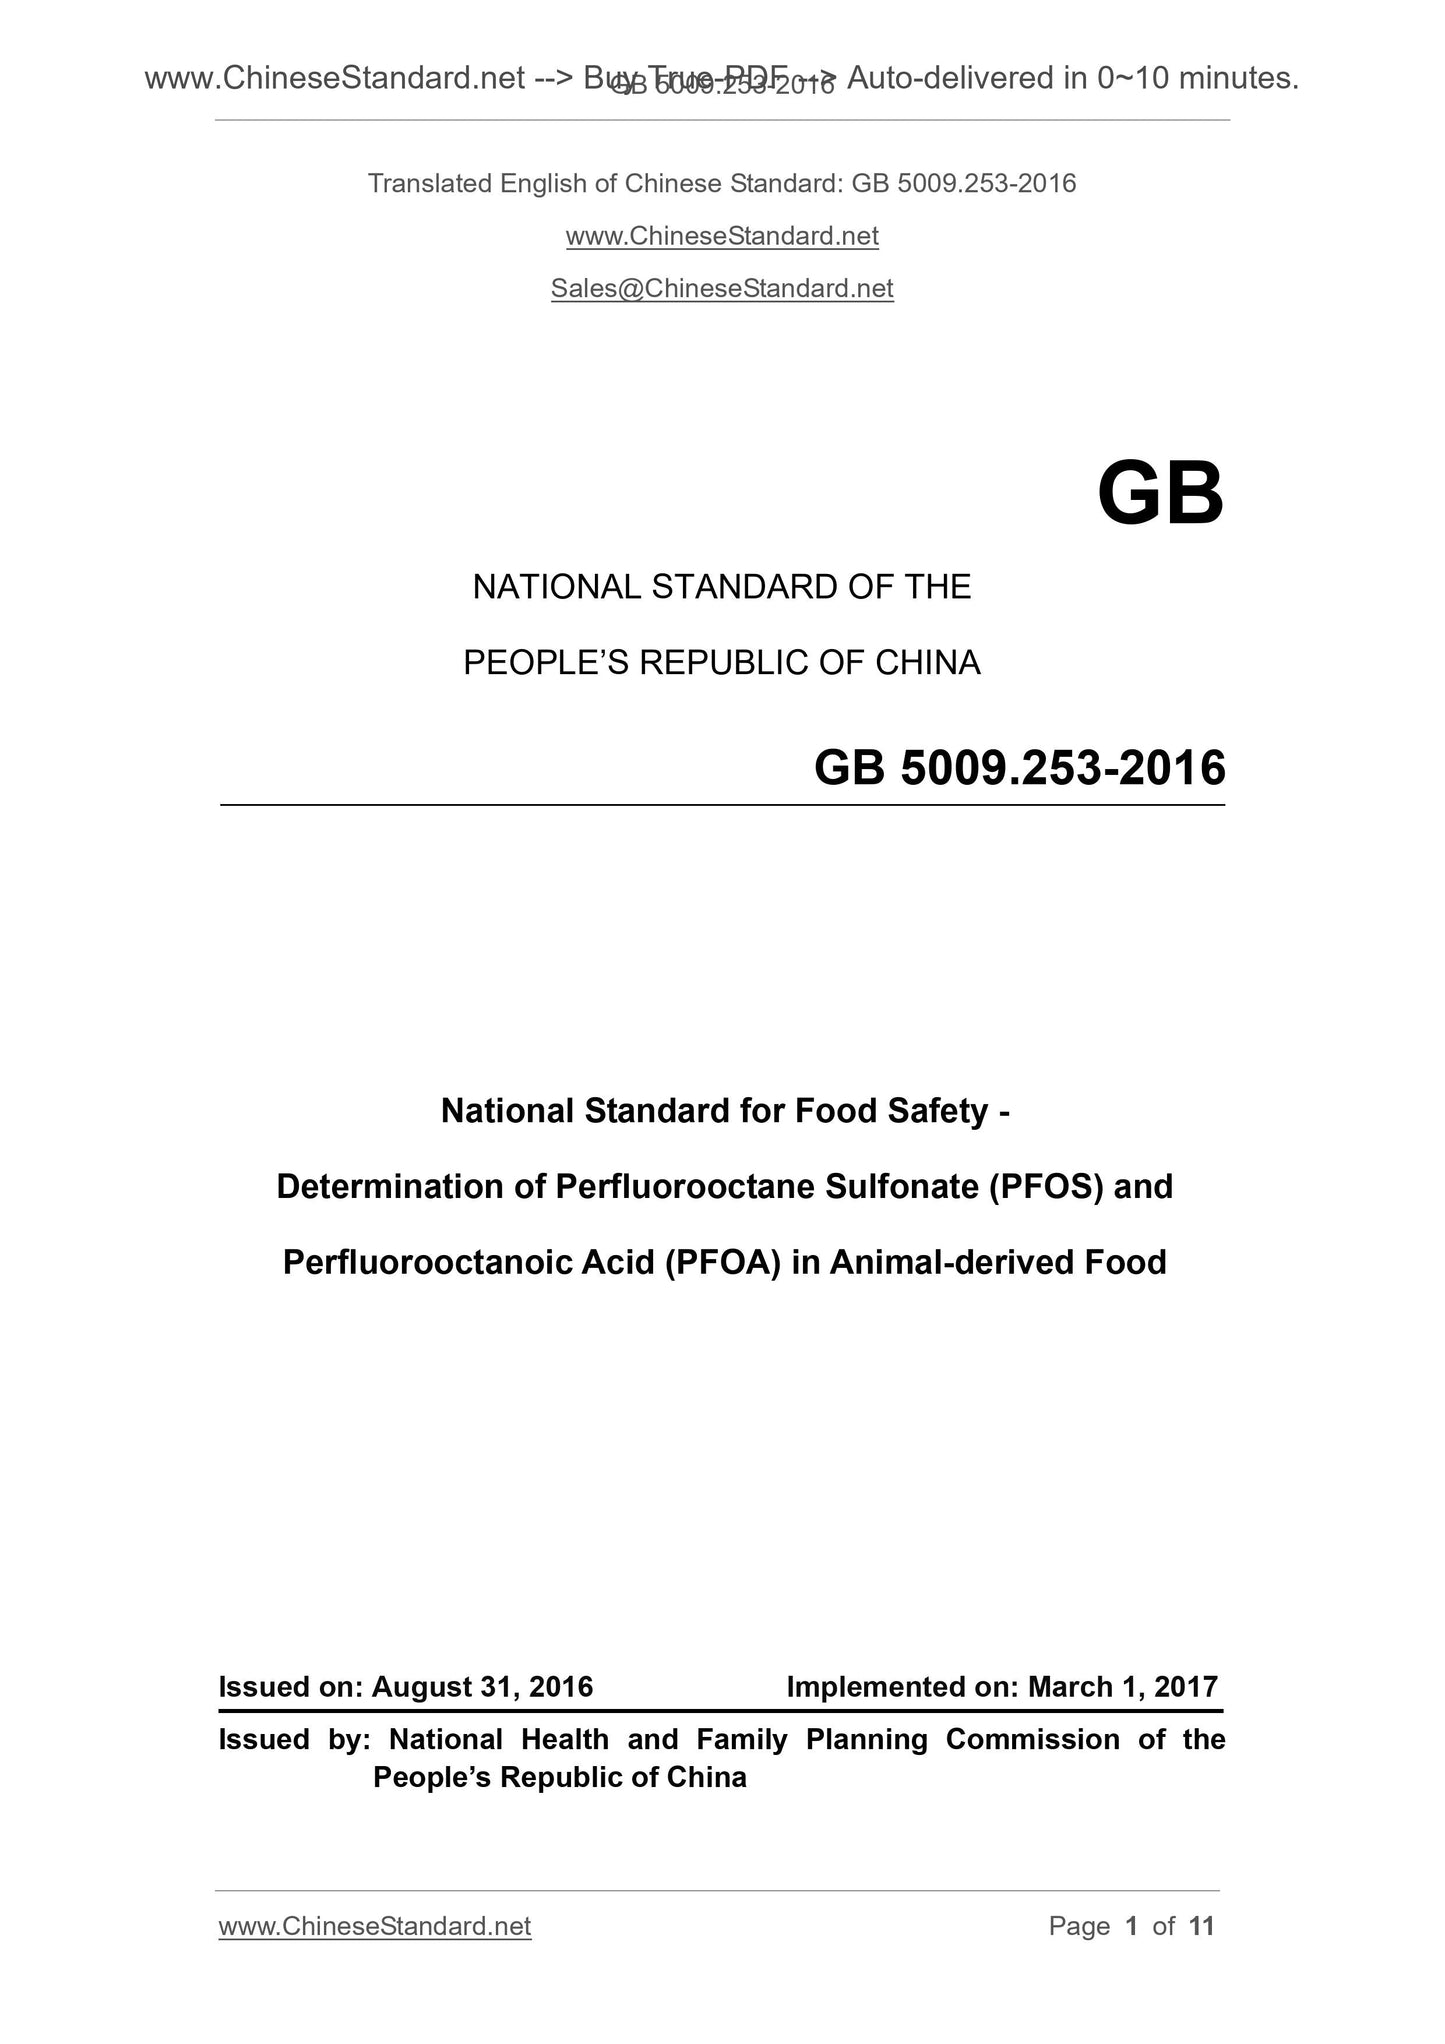 GB 5009.253-2016 Page 1